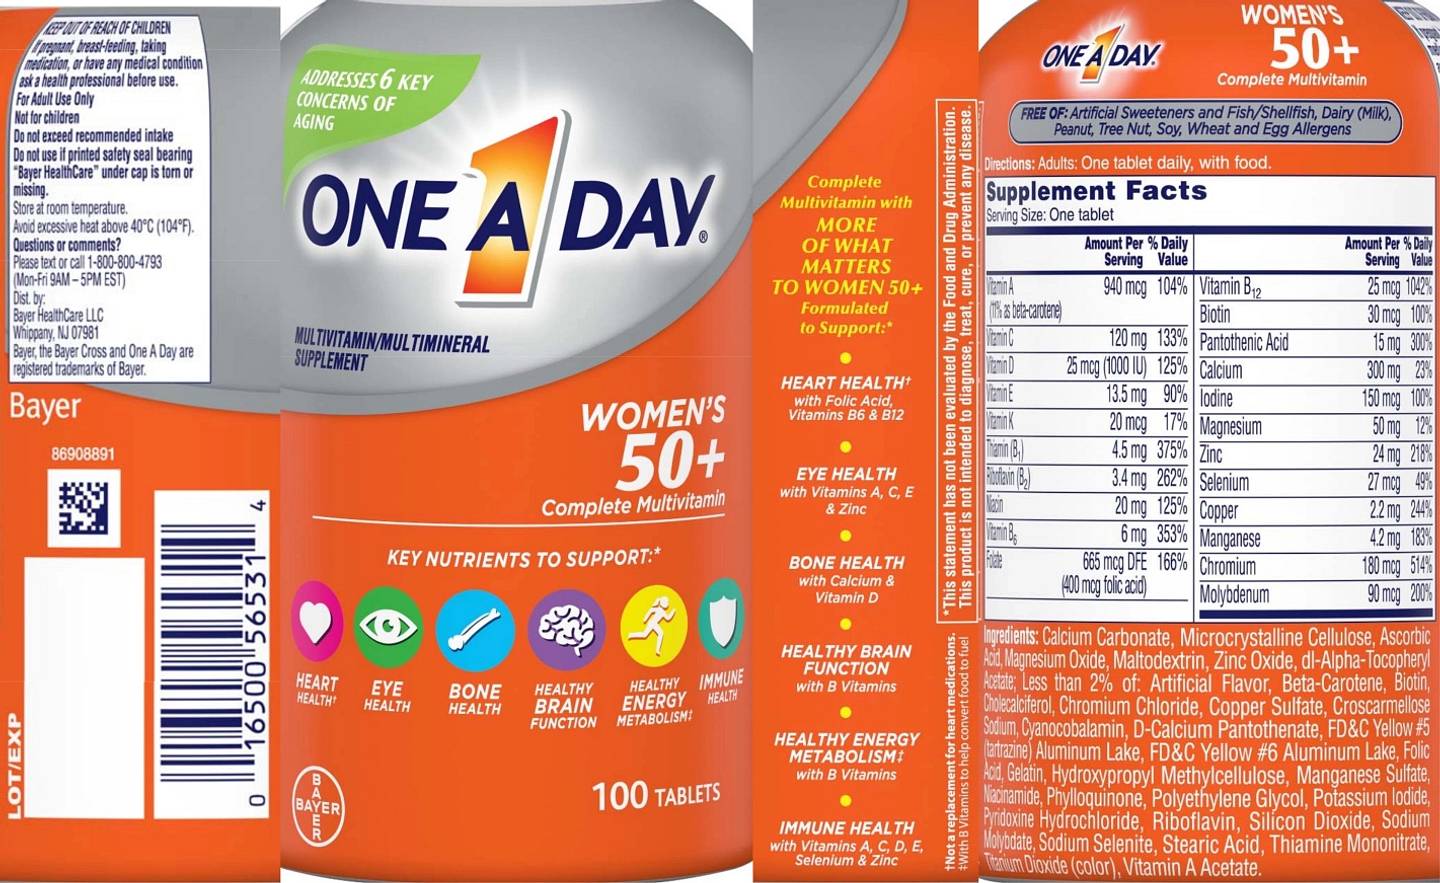 One-A-Day, Women's 50+ label